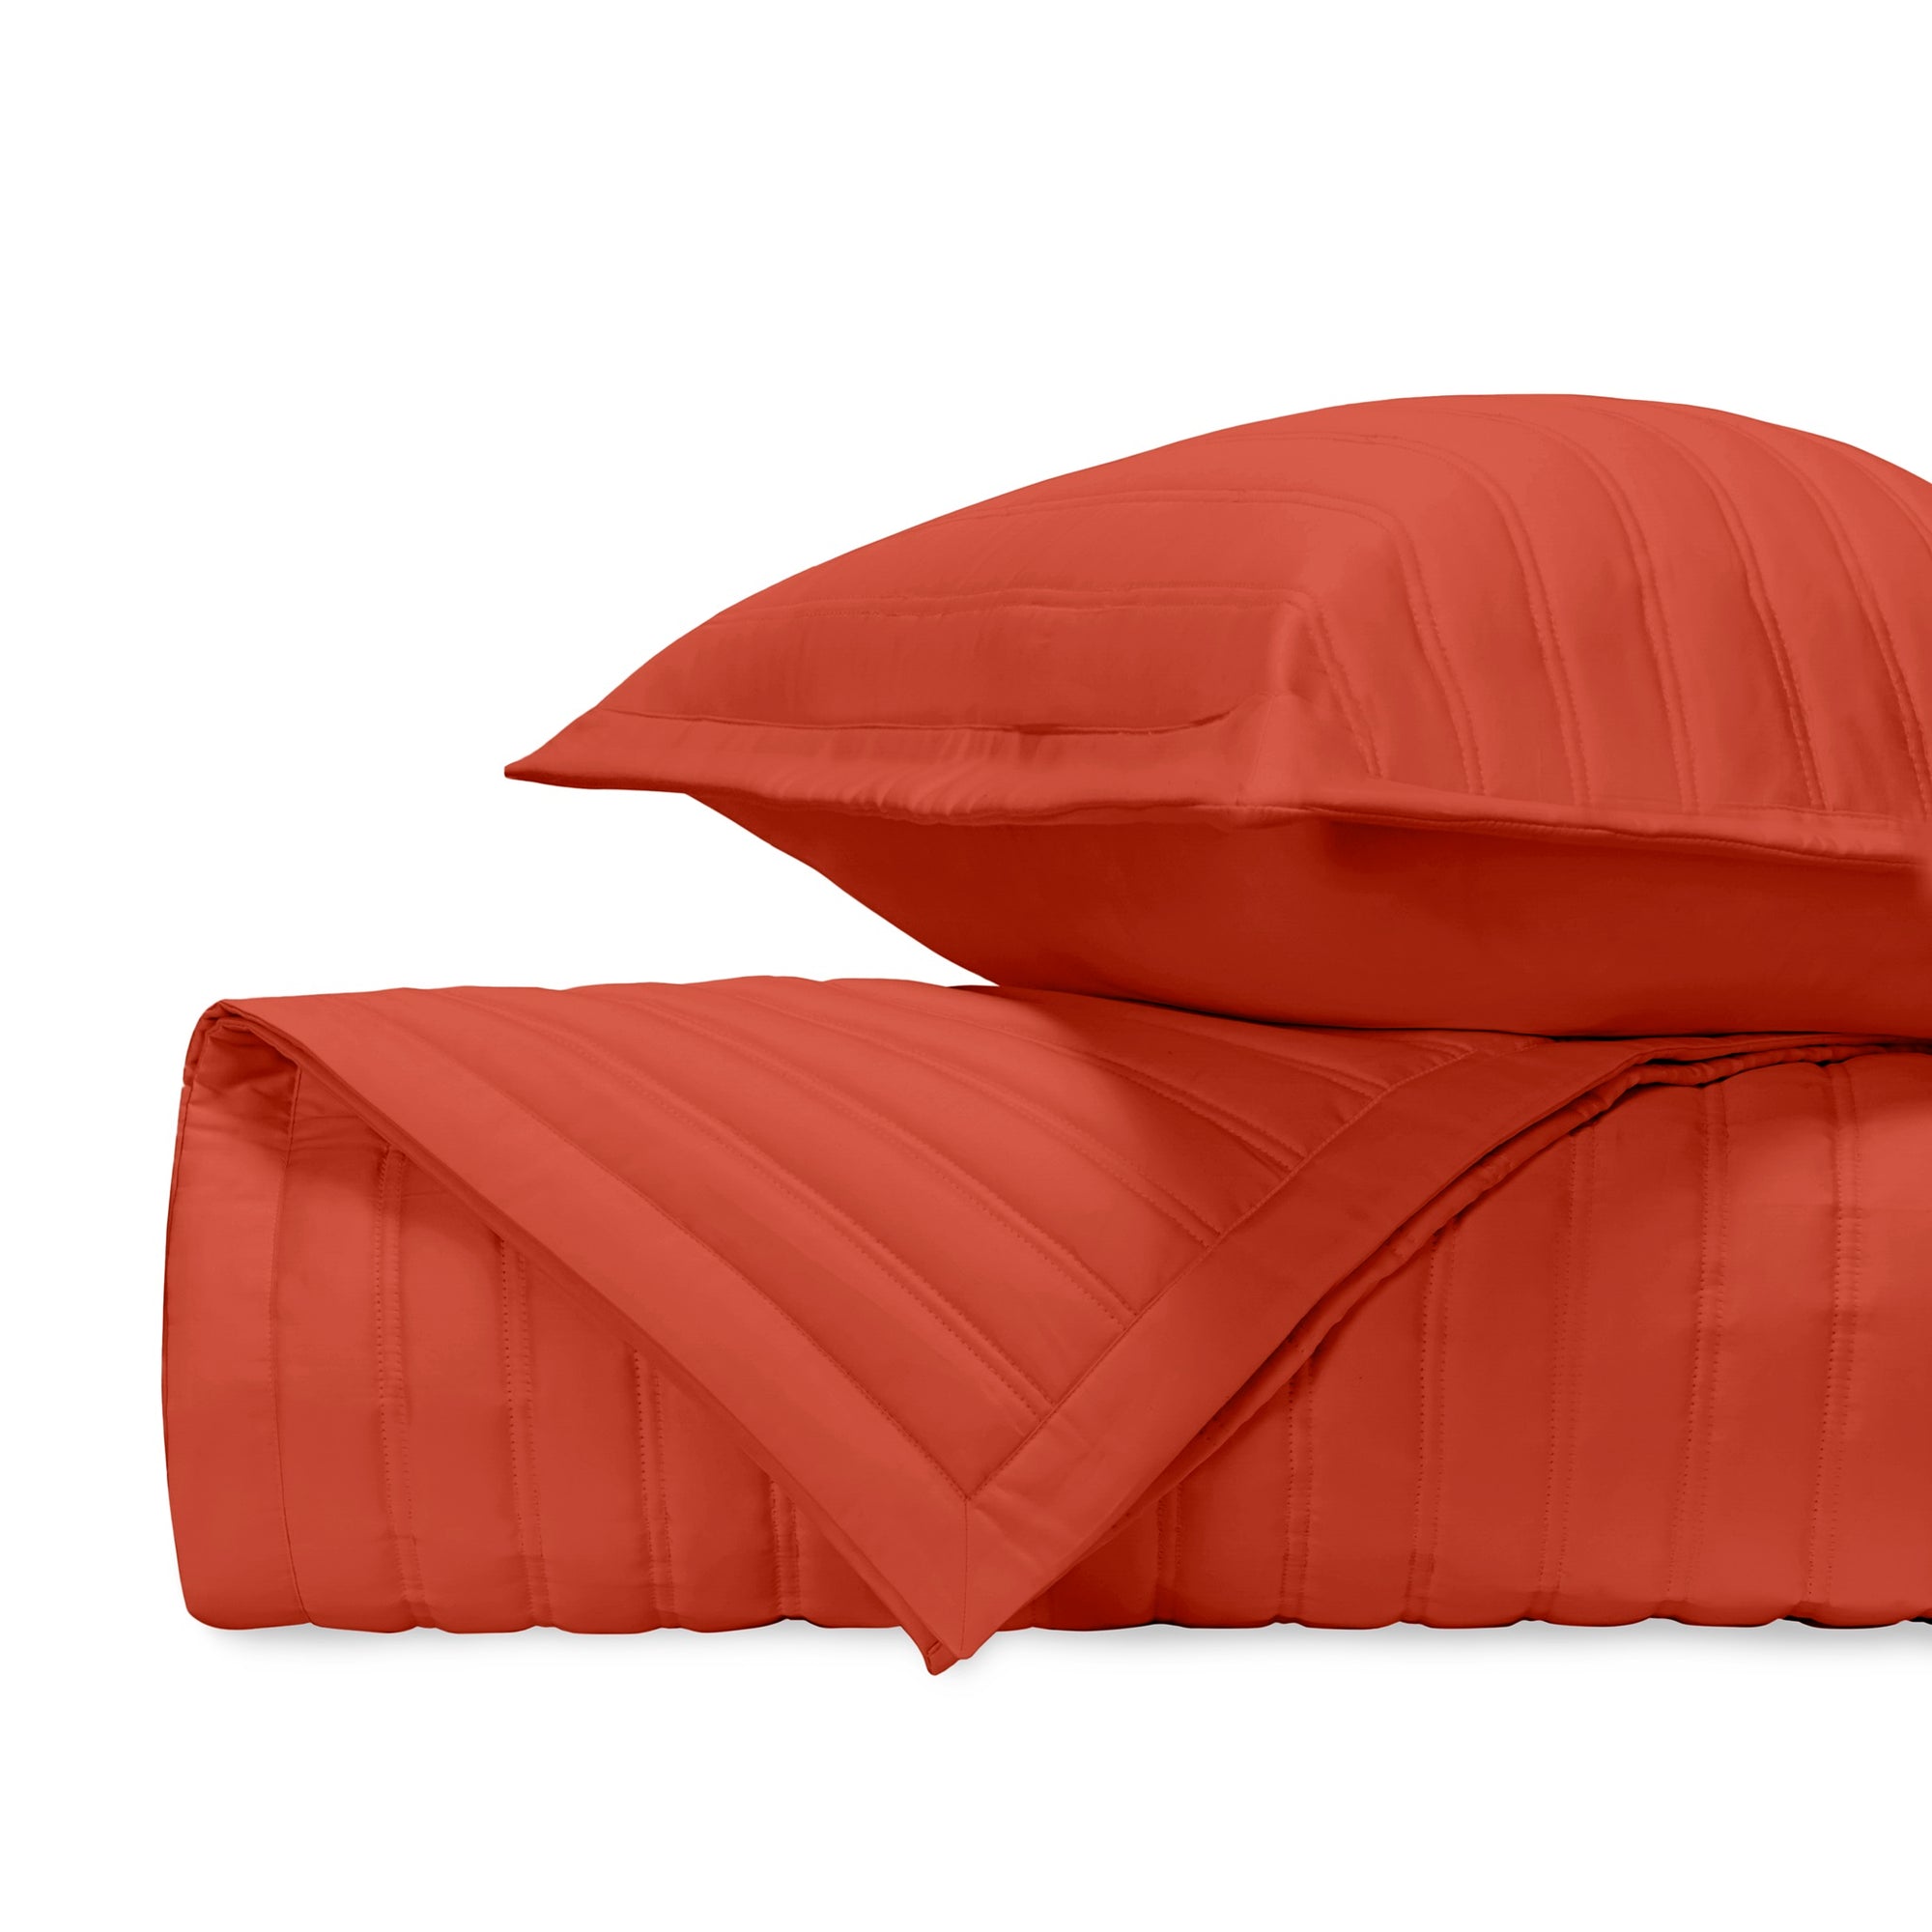 Stack Image of Home Treasures L'Avenue Royal Sateen Quilted Bedding in Color Lobster